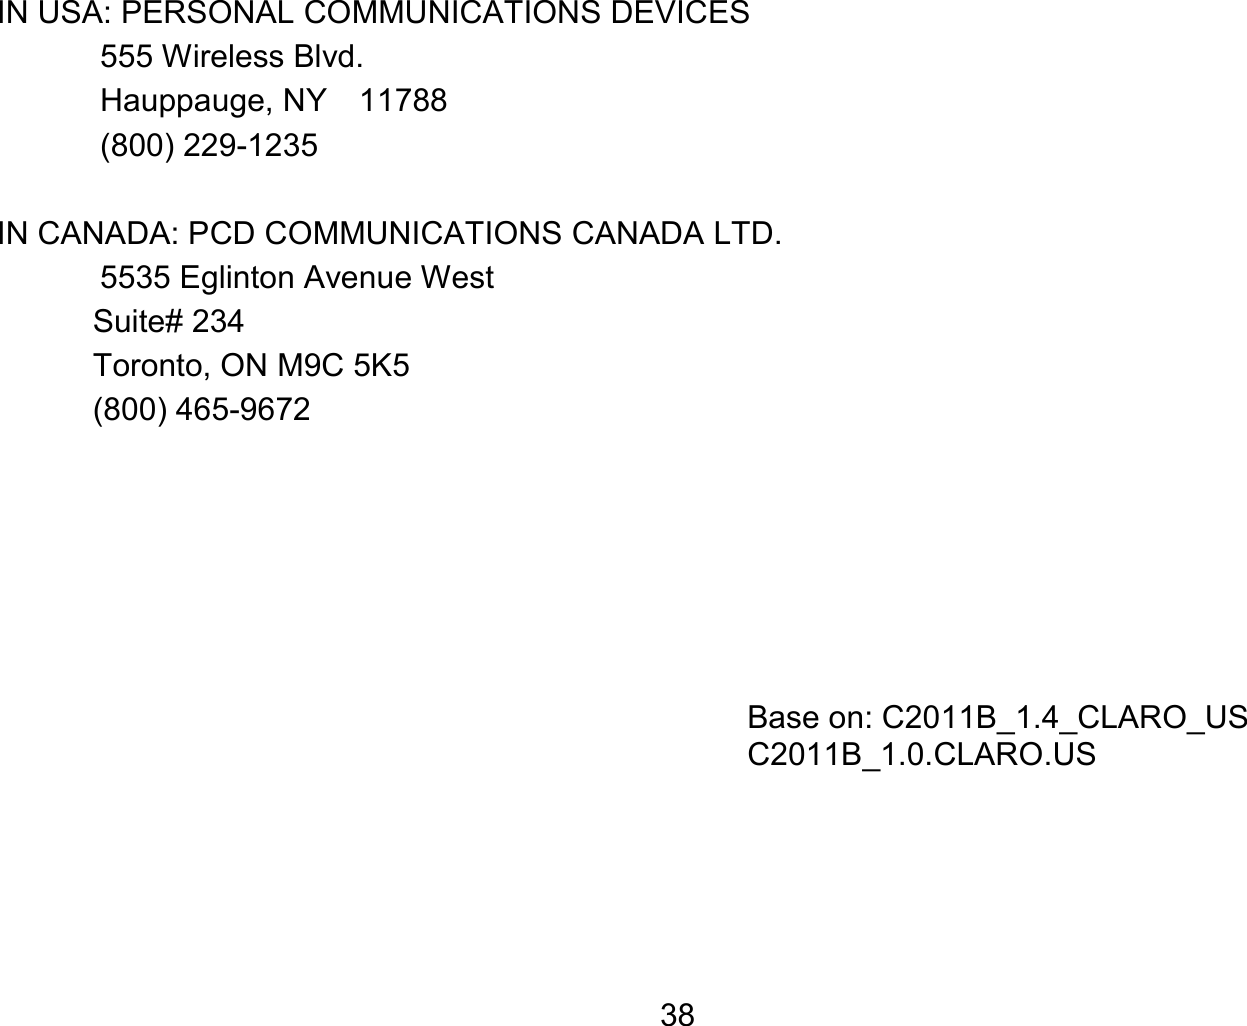   38IN USA: PERSONAL COMMUNICATIONS DEVICES  555 Wireless Blvd.   Hauppauge, NY  11788  (800) 229-1235  IN CANADA: PCD COMMUNICATIONS CANADA LTD.   5535 Eglinton Avenue West Suite# 234 Toronto, ON M9C 5K5 (800) 465-9672          Base on: C2011B_1.4_CLARO_US C2011B_1.0.CLARO.US  